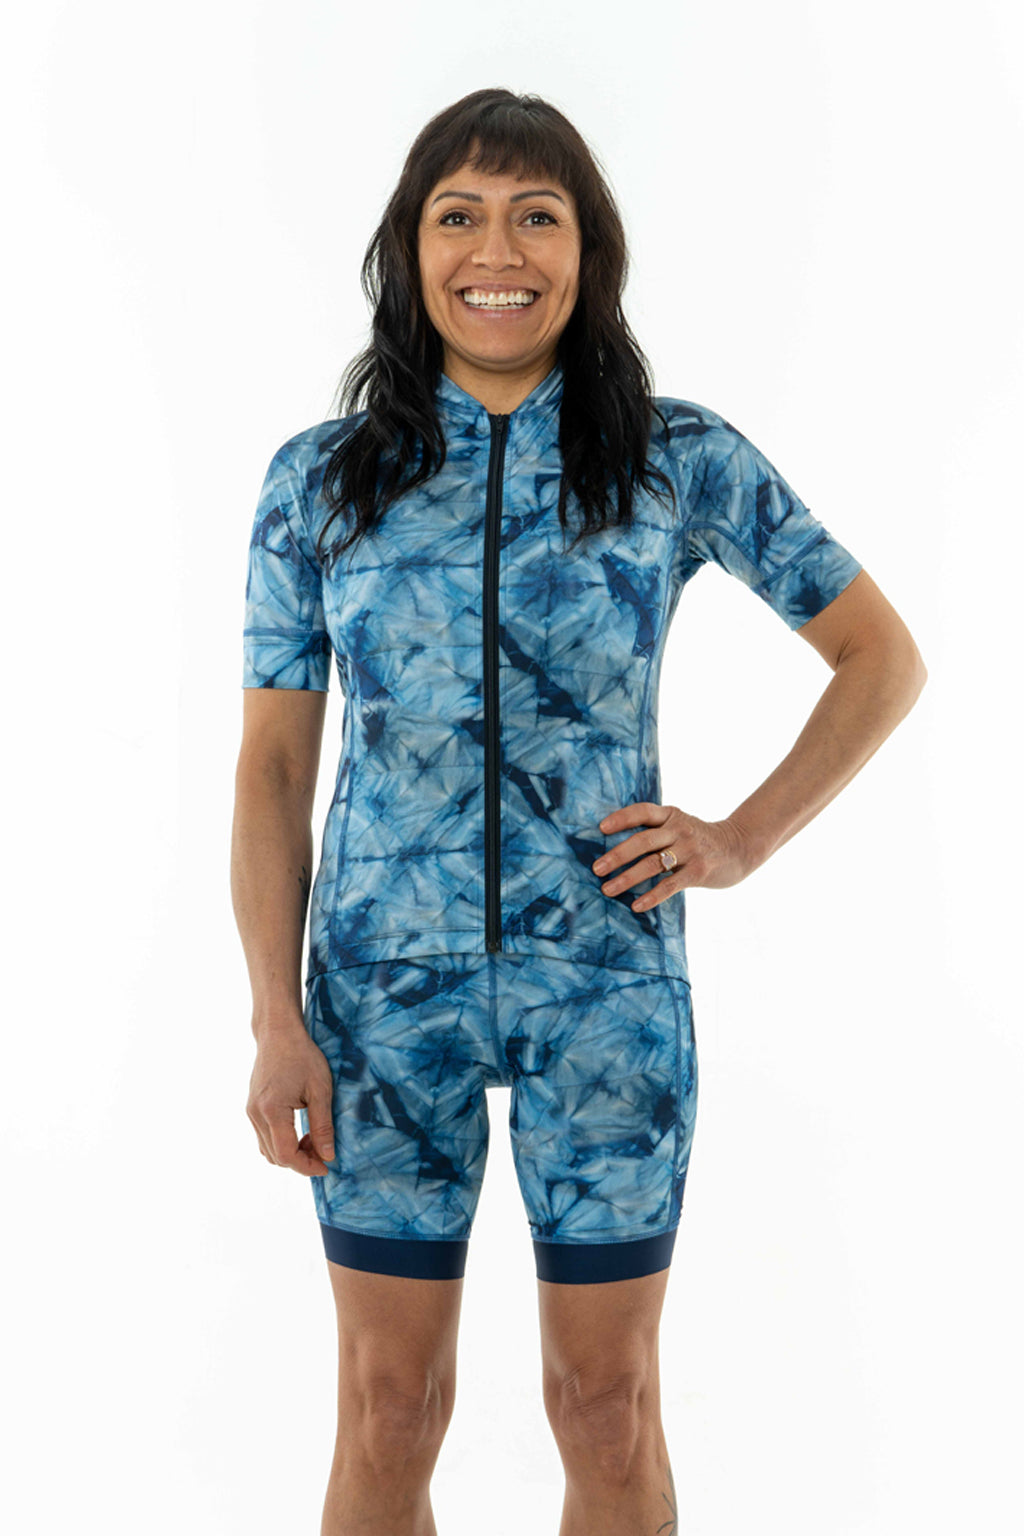  Women's Cycling Jersey - Breathable, Moisture Wicking, Indigo